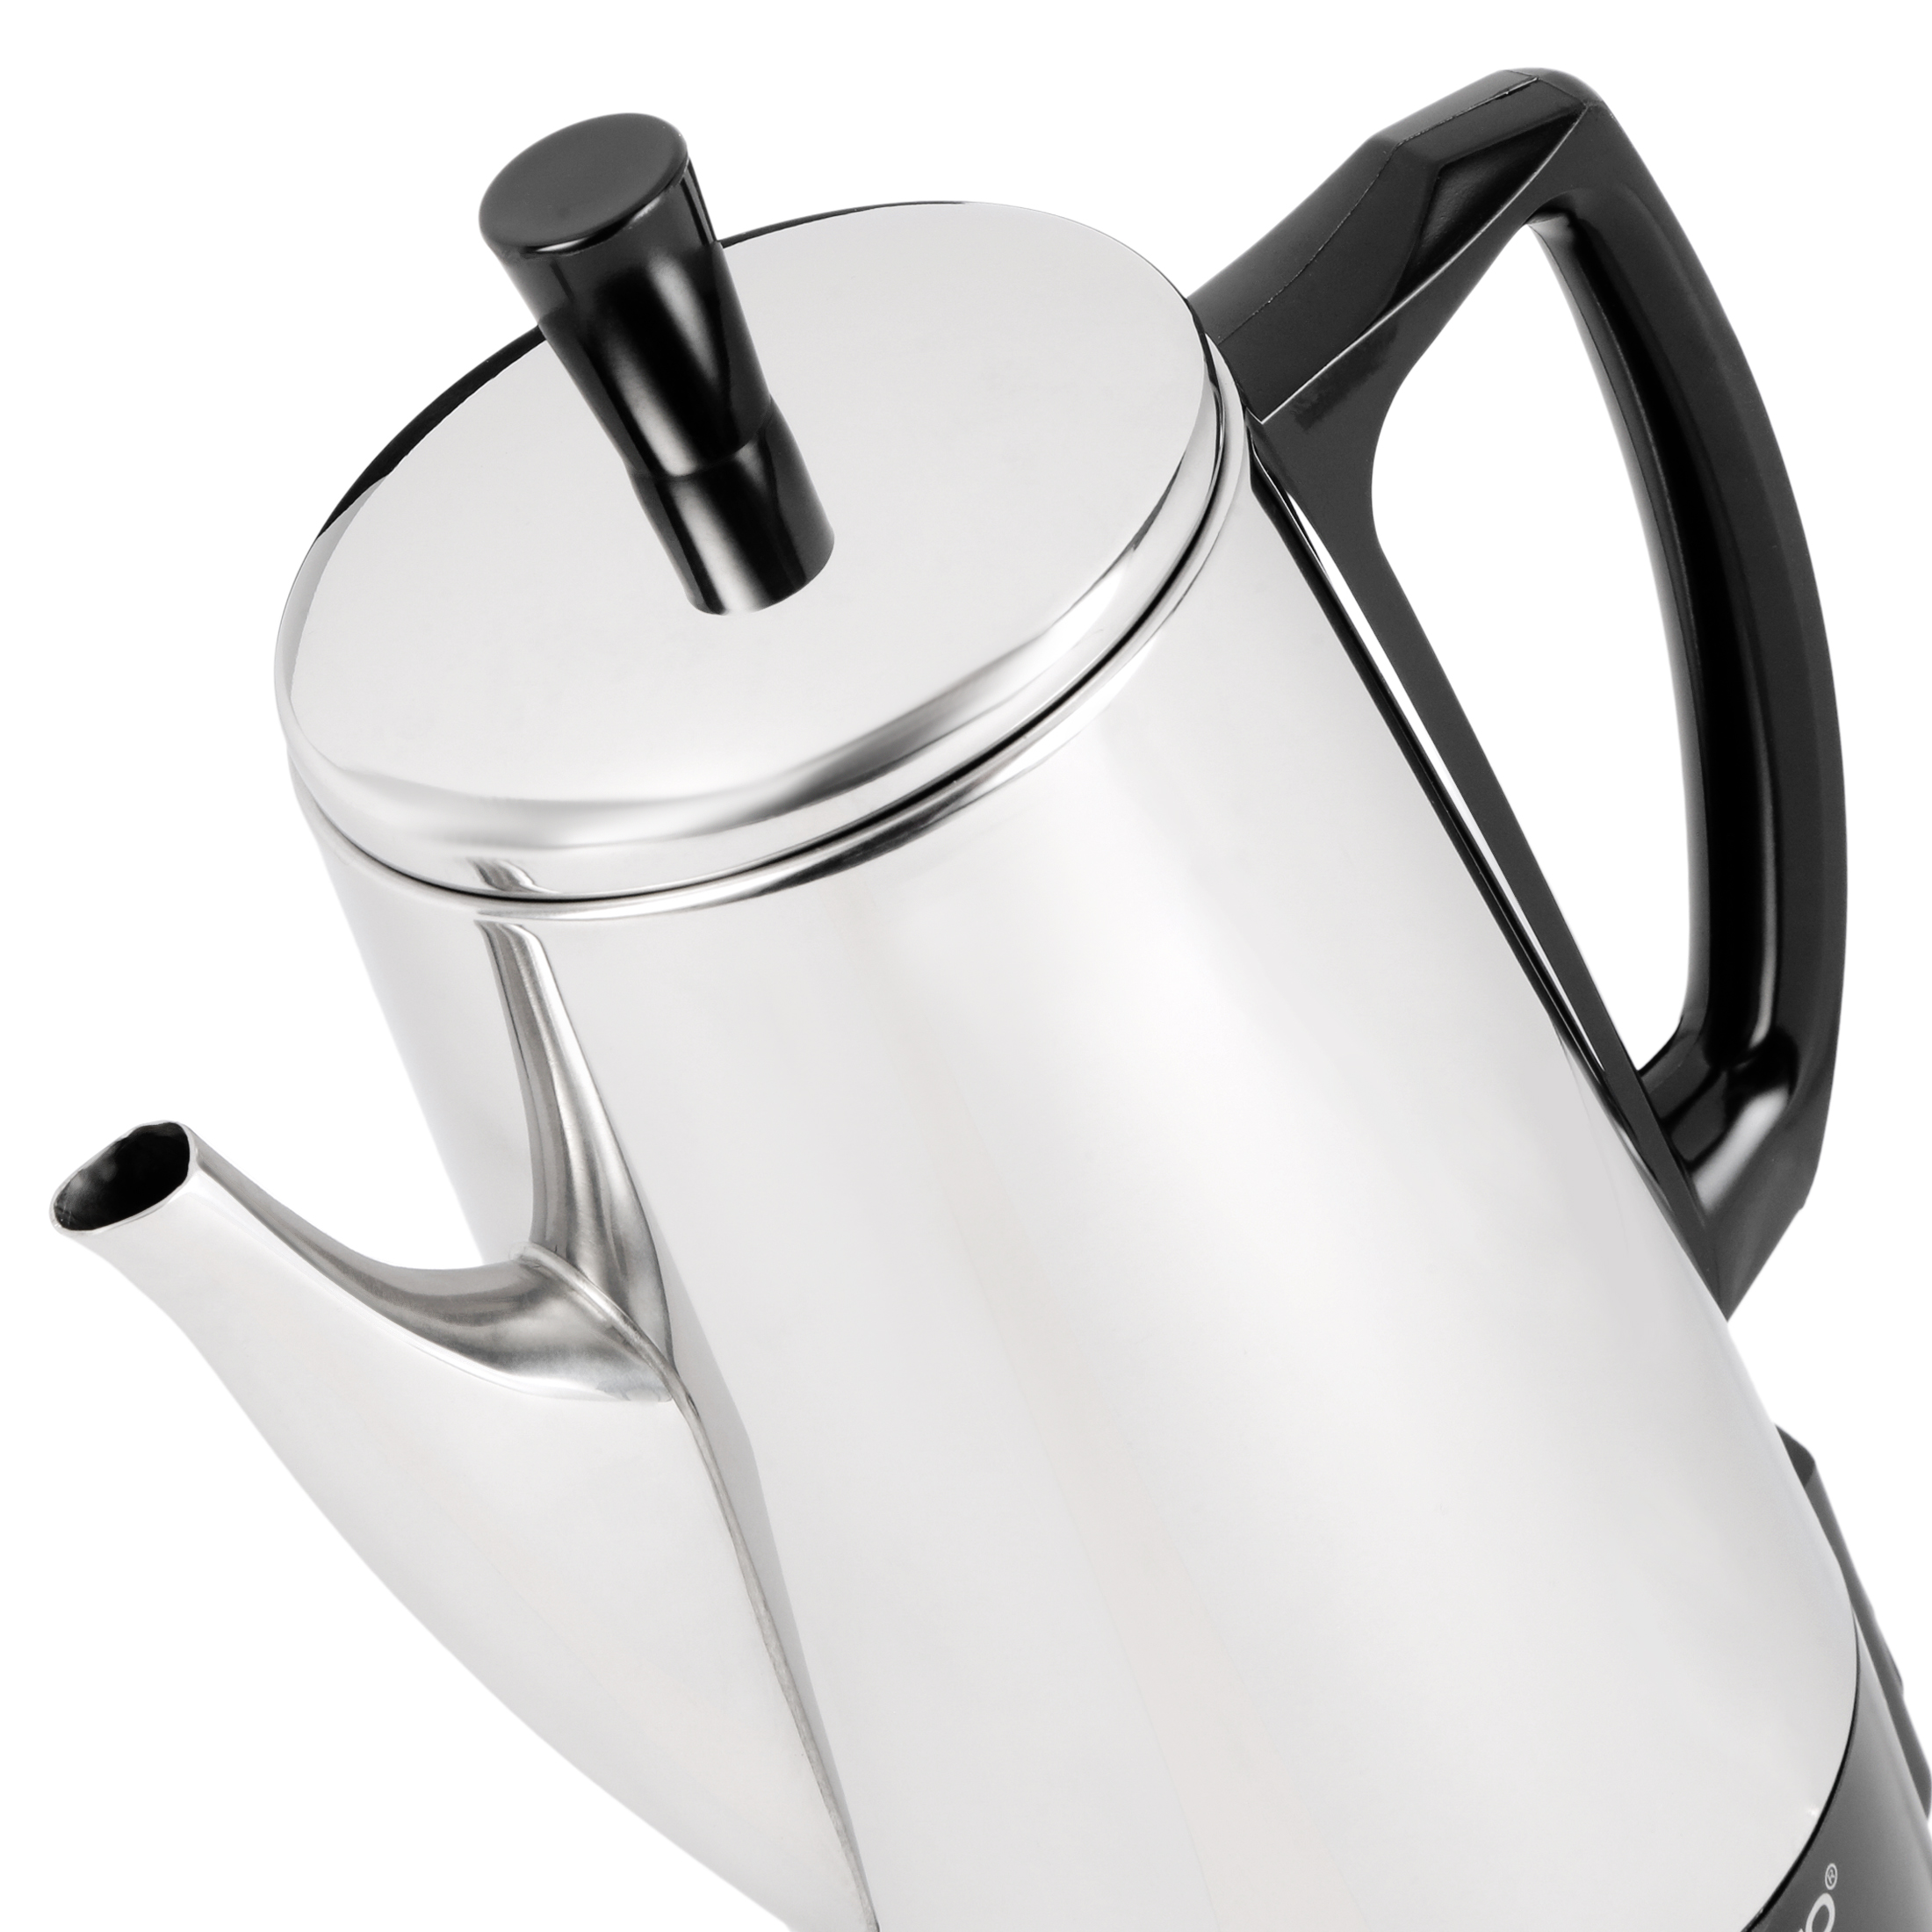 Presto® 6-Cup Capacity Stainless Steel Coffee Maker 02822 - image 5 of 10